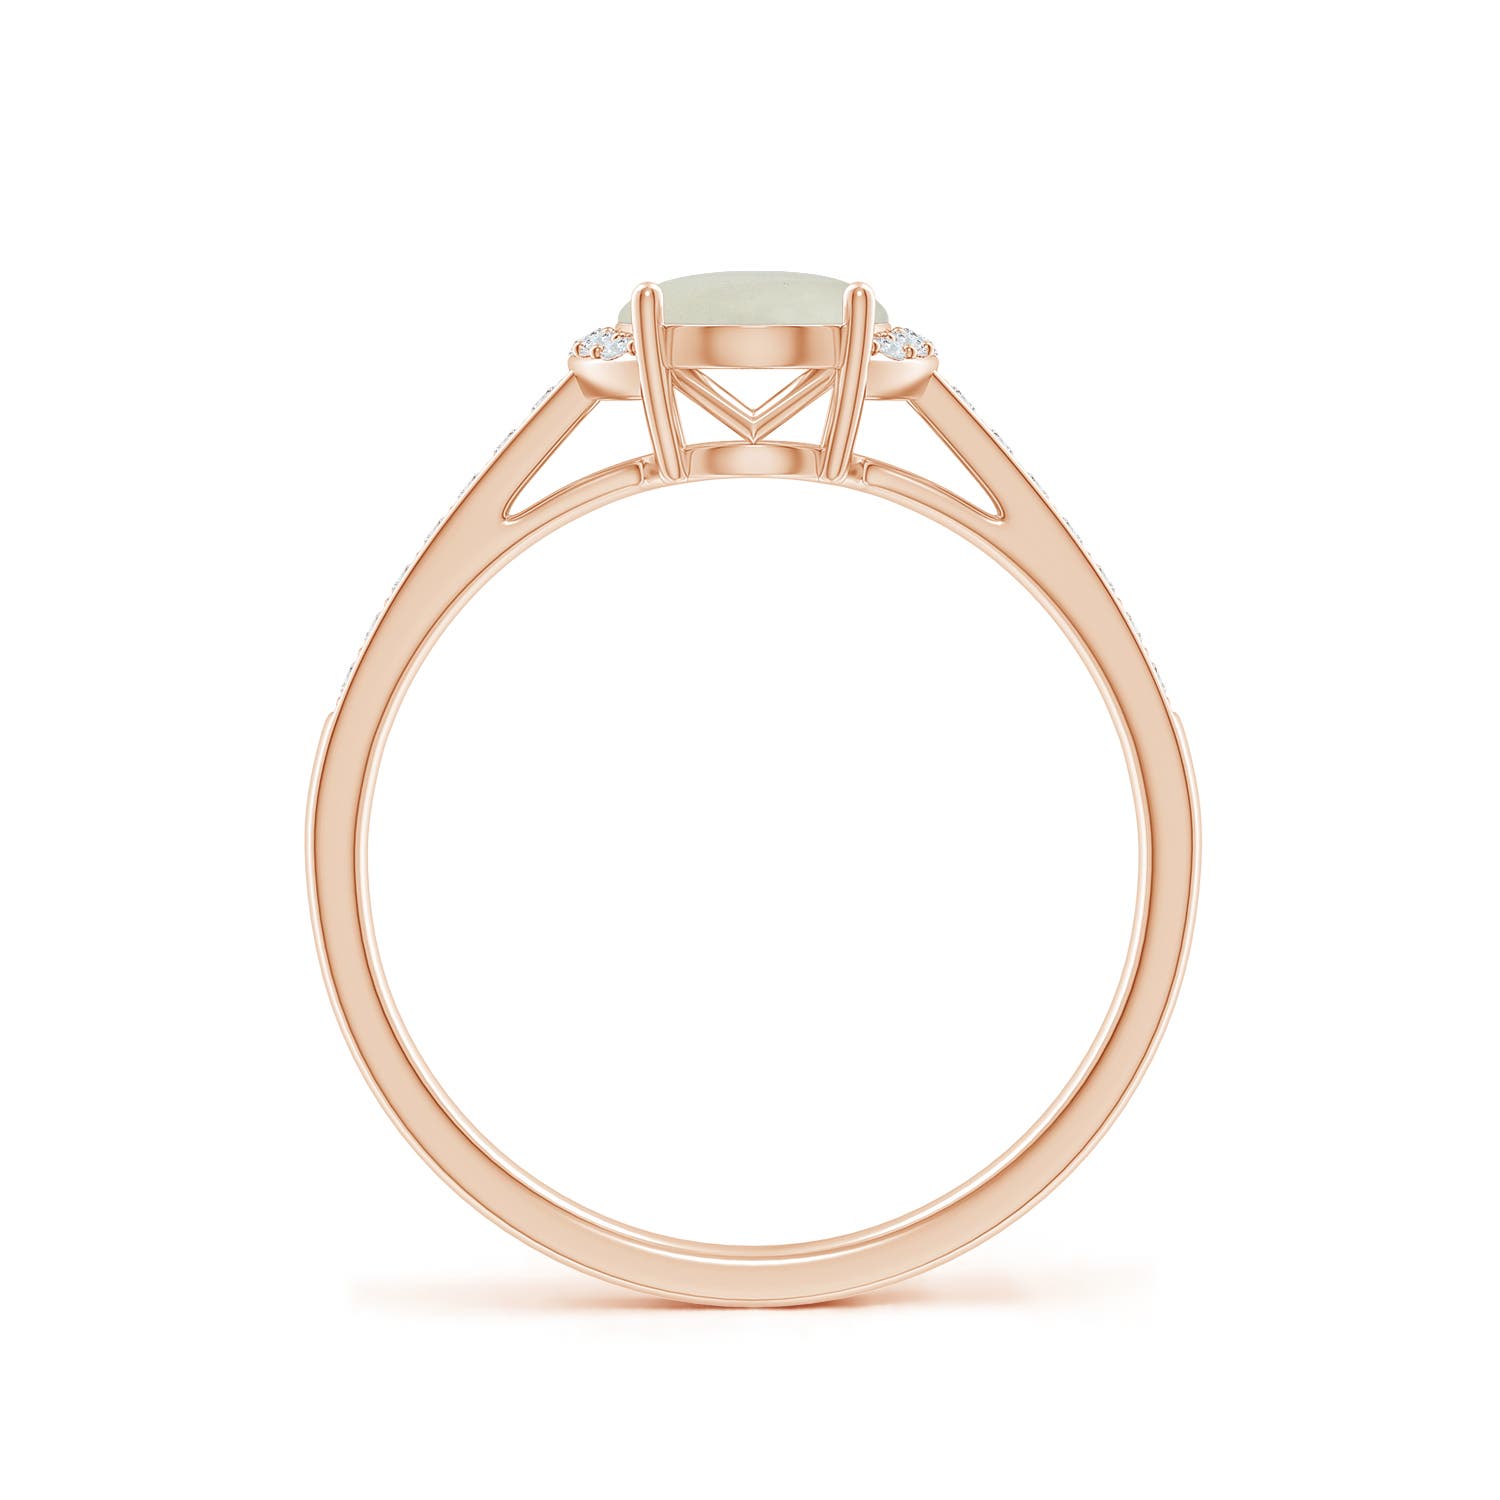 AA - Moonstone / 1.23 CT / 14 KT Rose Gold